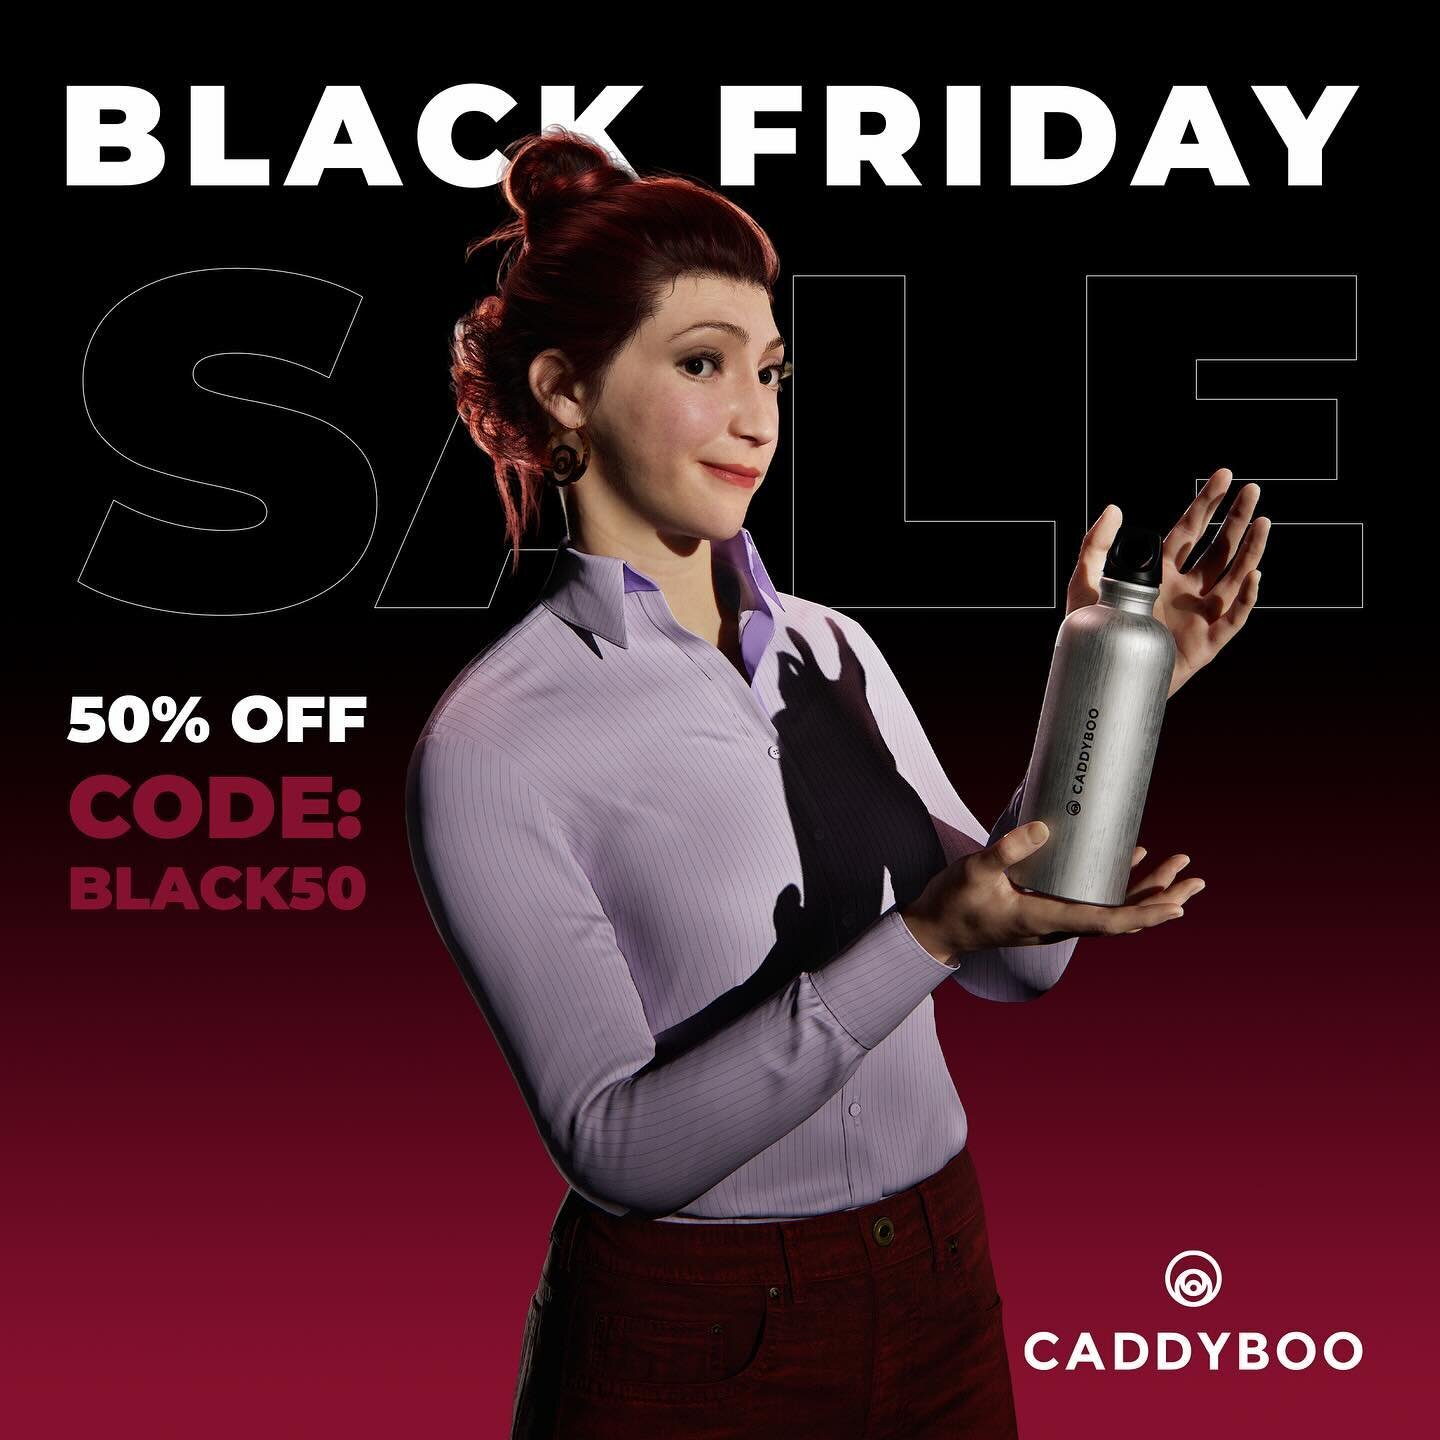 Ending SOON
Caddyboo Black Friday Sale ends on 1st of December!

Grab your savings NOW!
🔥BLACK50 for 50% off the Caddyboo Bottle
🔥BLACK40 for 40% off  the All Leather Products

Last chance to use the discounts!

#Caddyboo #BlackFriday #BlackFridayS